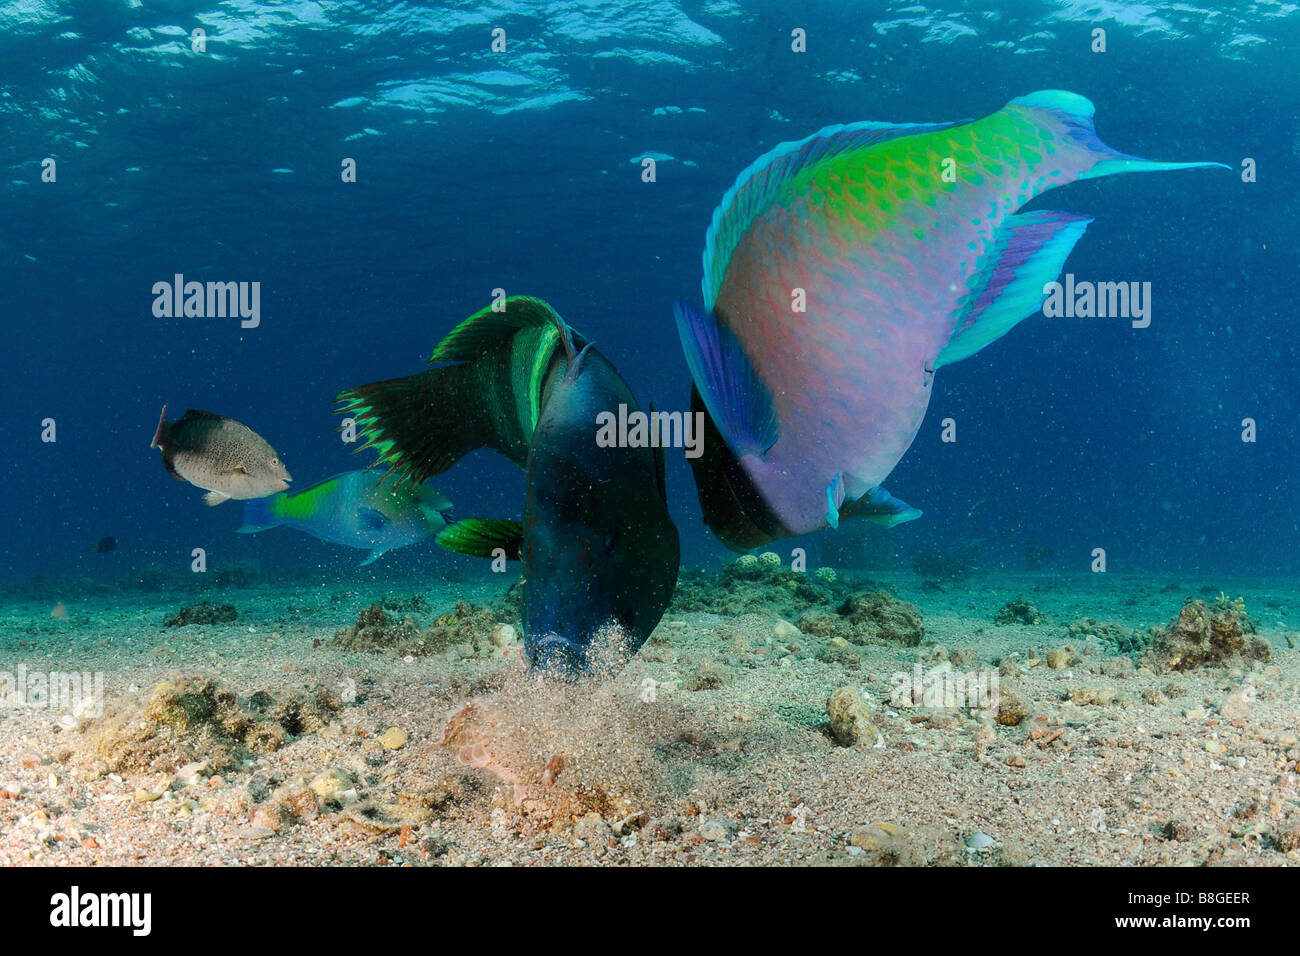 a humphead wrasse Cheilinus undulatus and a Rusty parrotfish scarus ferrugineus in a frenzy of eating Stock Photo